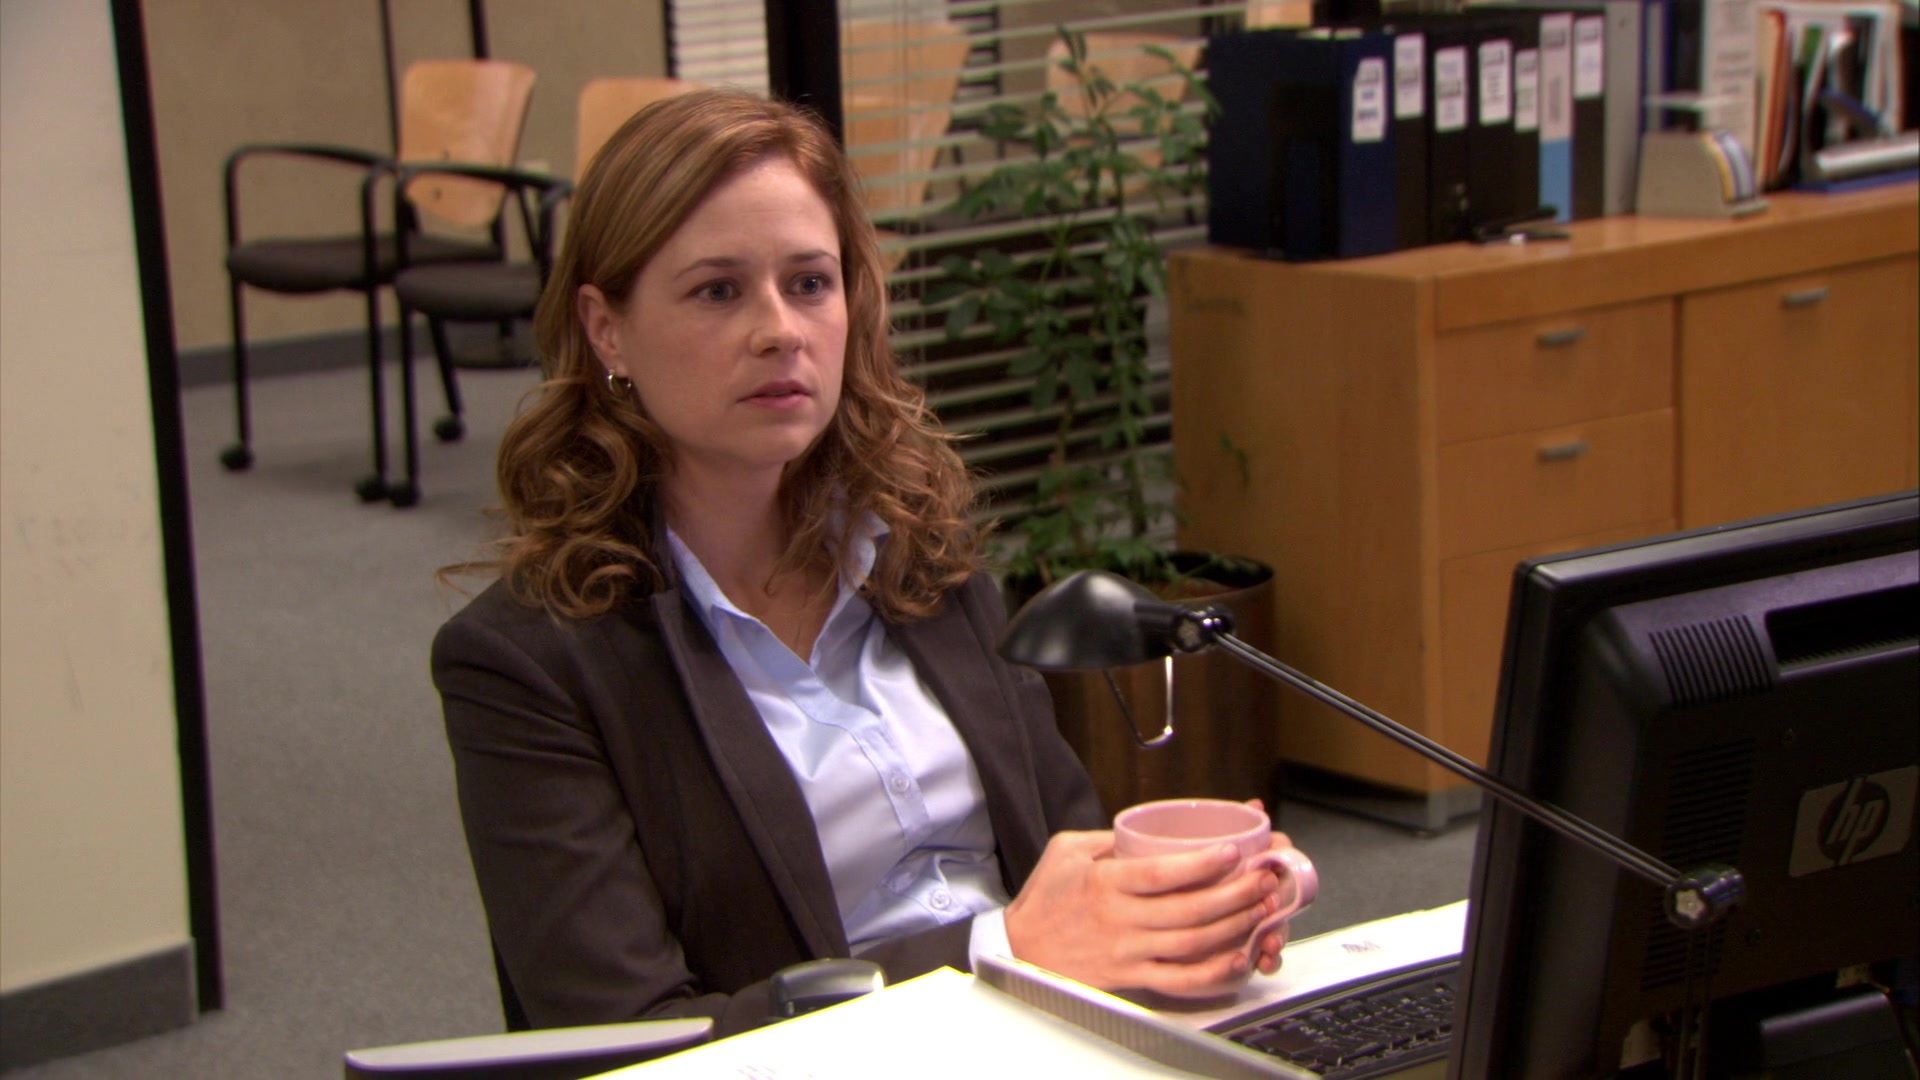 HP Monitor Used By Jenna Fischer (Pam Beesly) In The Office - Season 6, Epi...